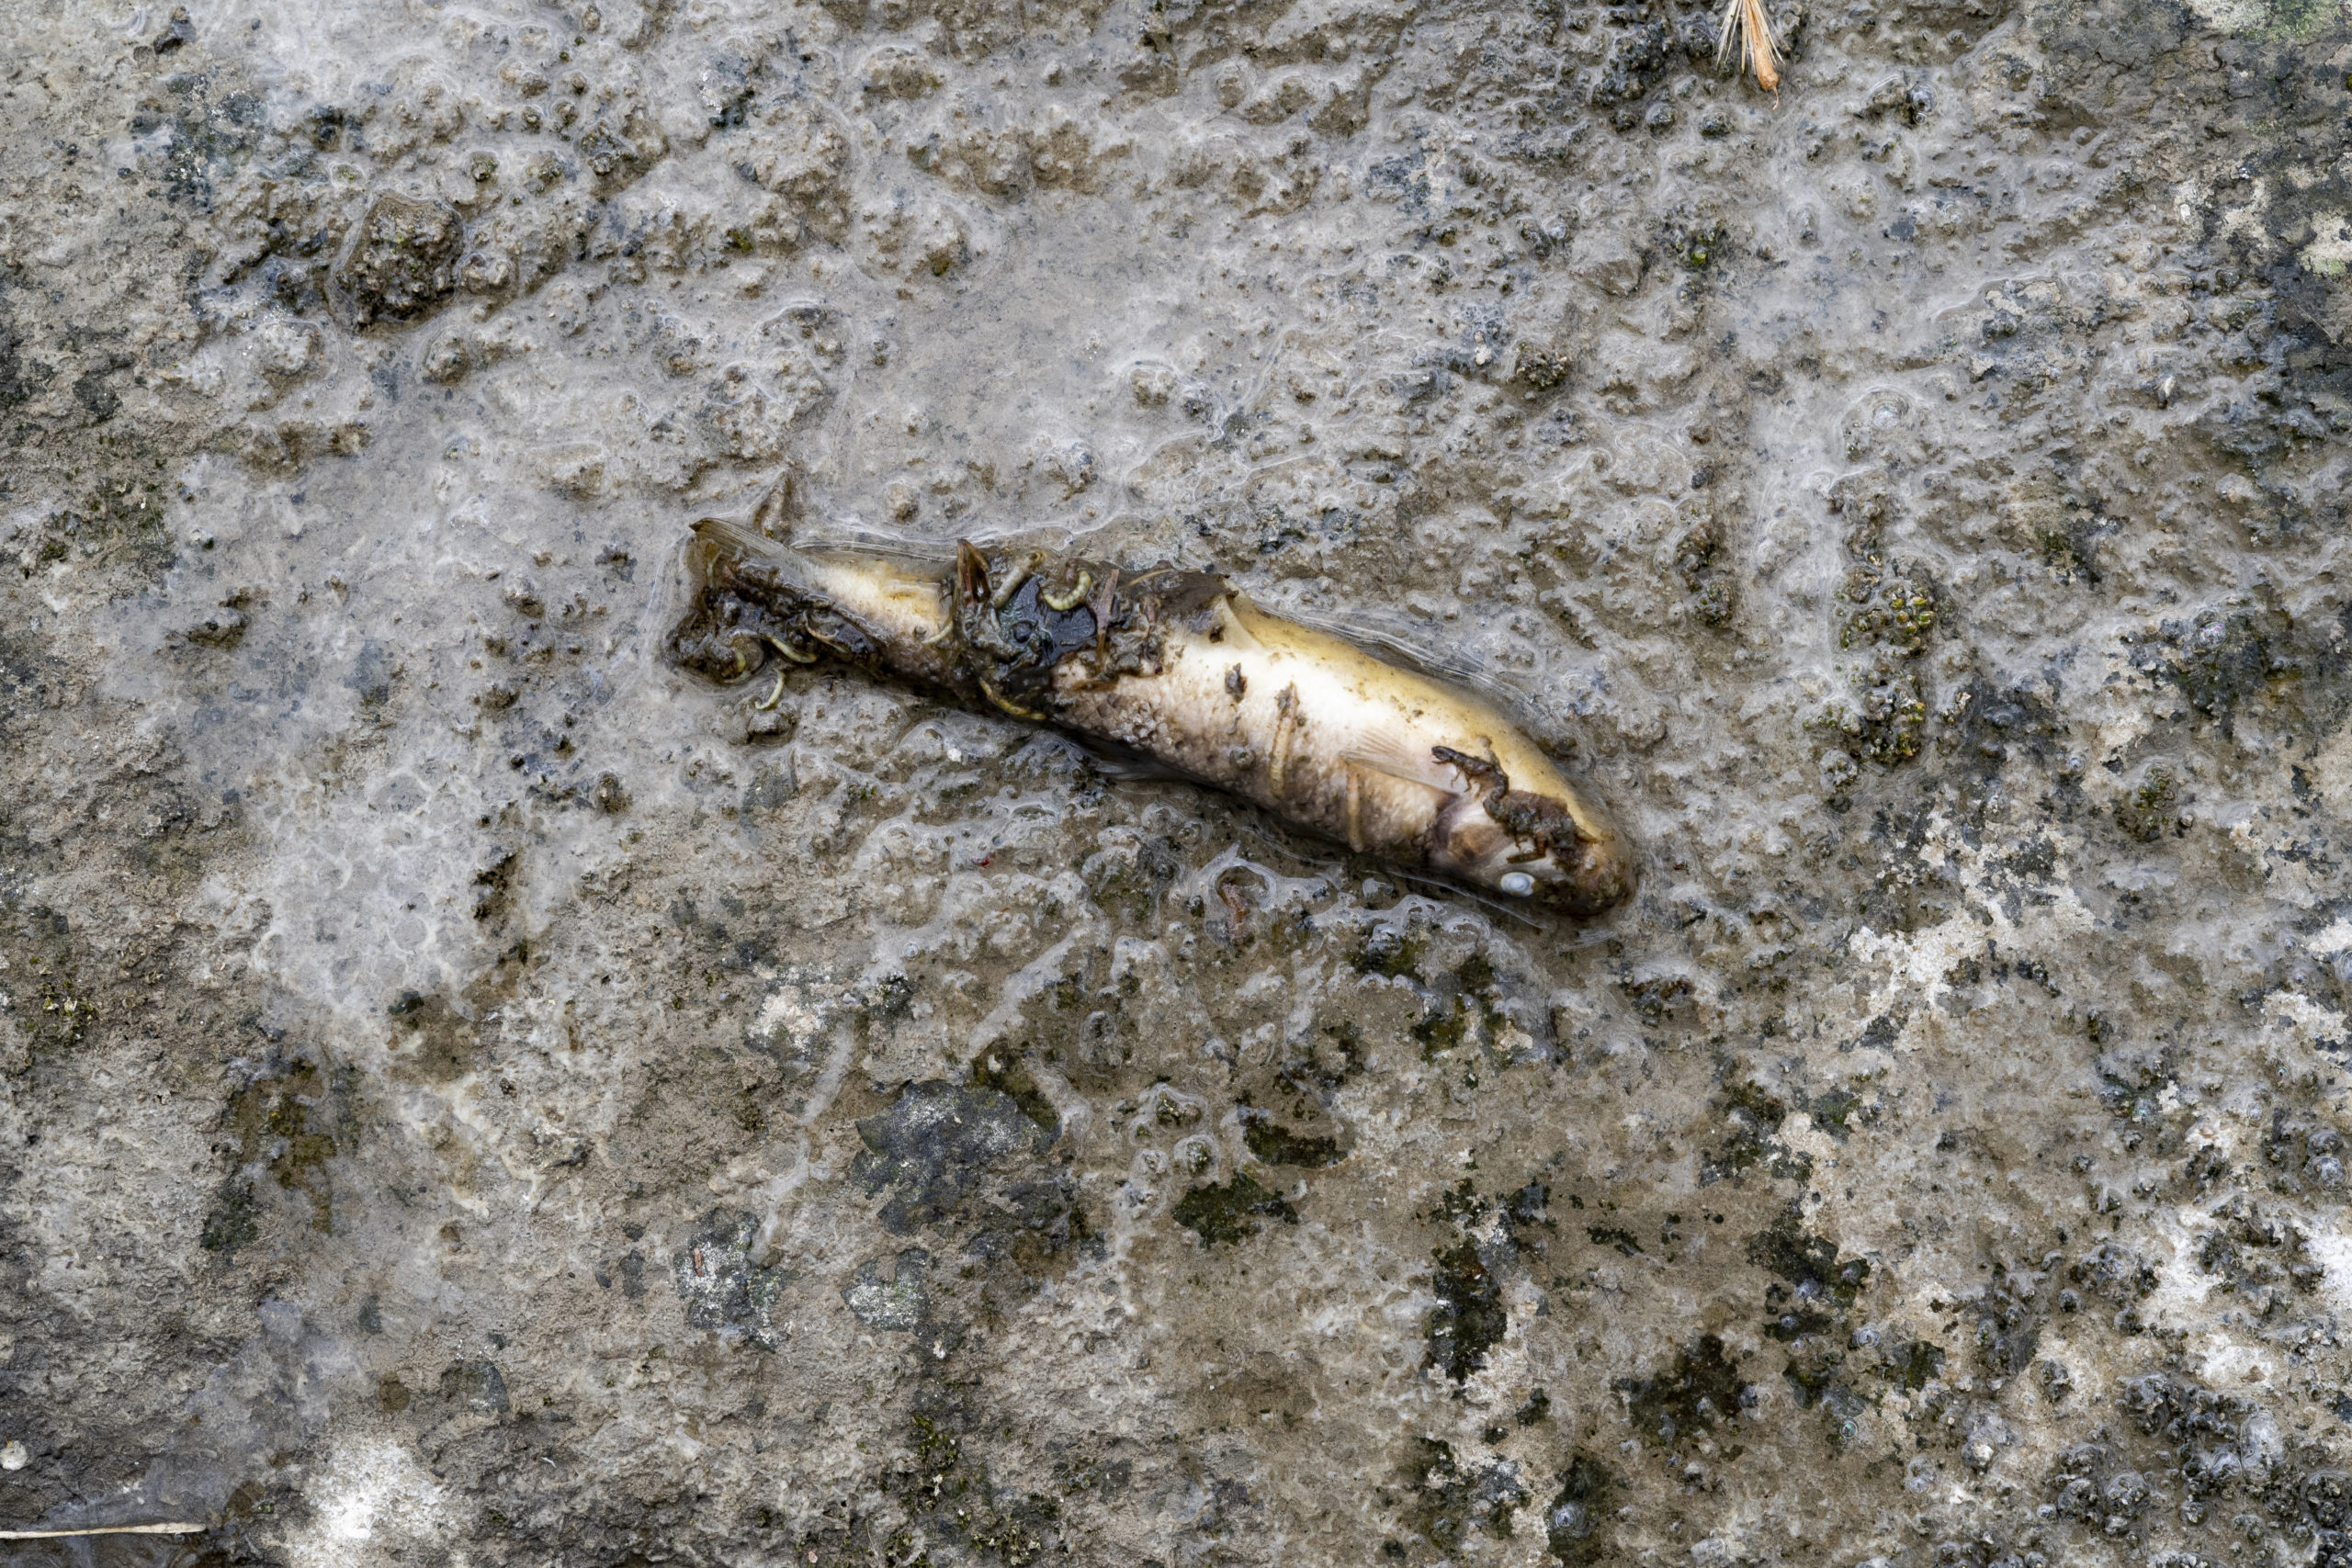 EAST PALESTINE, OH - FEBRUARY 20: A fish lays dead following a train derailment prompting health concerns on February 20, 2023 in East Palestine, Ohio. On February 3rd, a Norfolk Southern Railways train carrying toxic chemicals derailed causing an environmental disaster. Thousands of residents were ordered to evacuate after the area was placed under a state of emergency and temporary evacuation orders. (Photo by Michael Swensen/Getty Images)